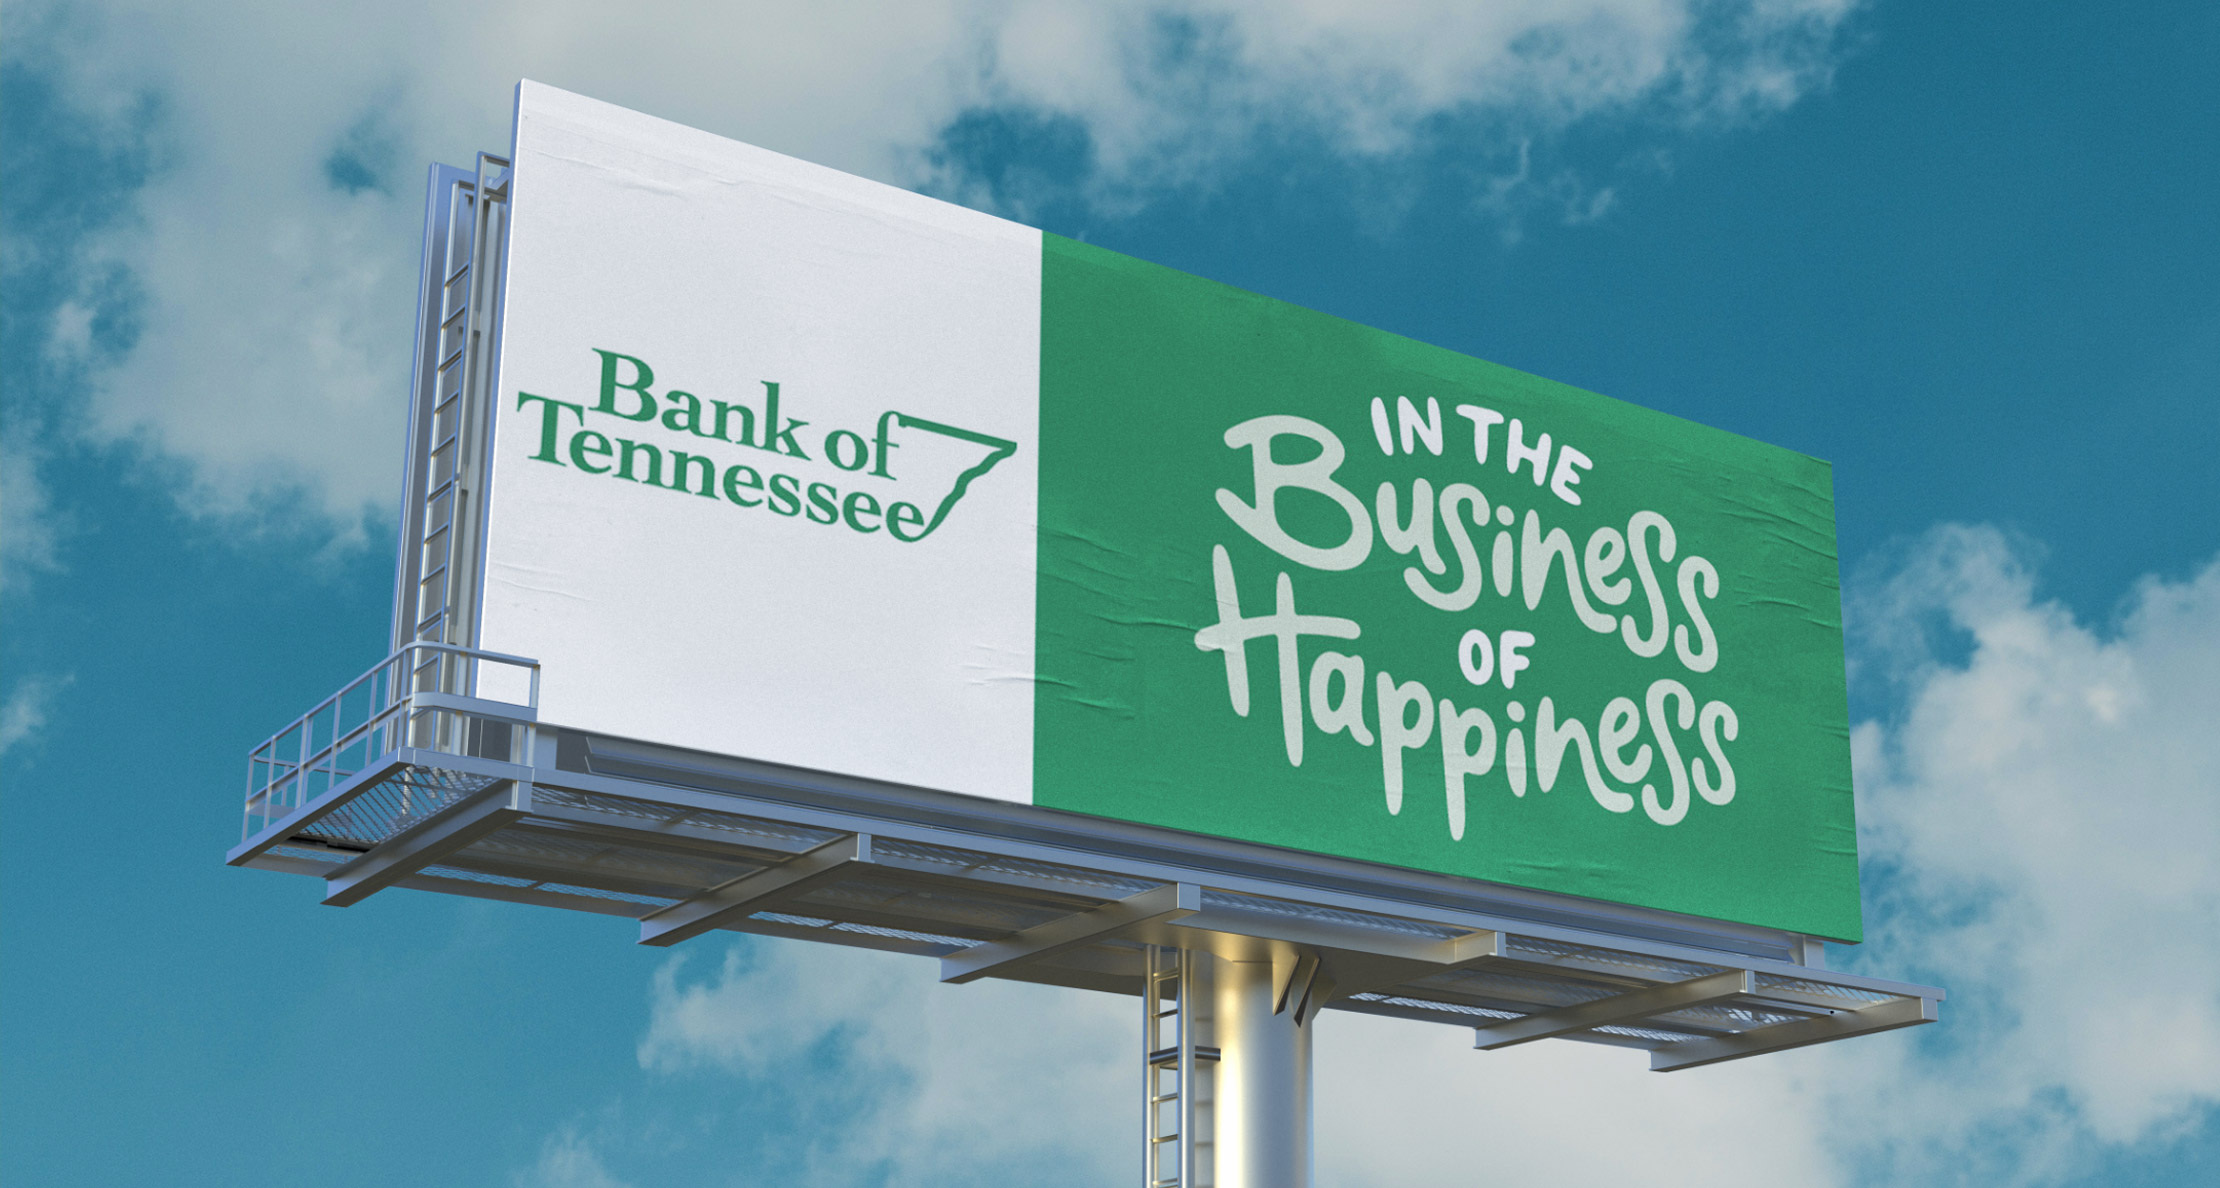 Creative Energy - Bank of Tennessee - In the Business of Happiness